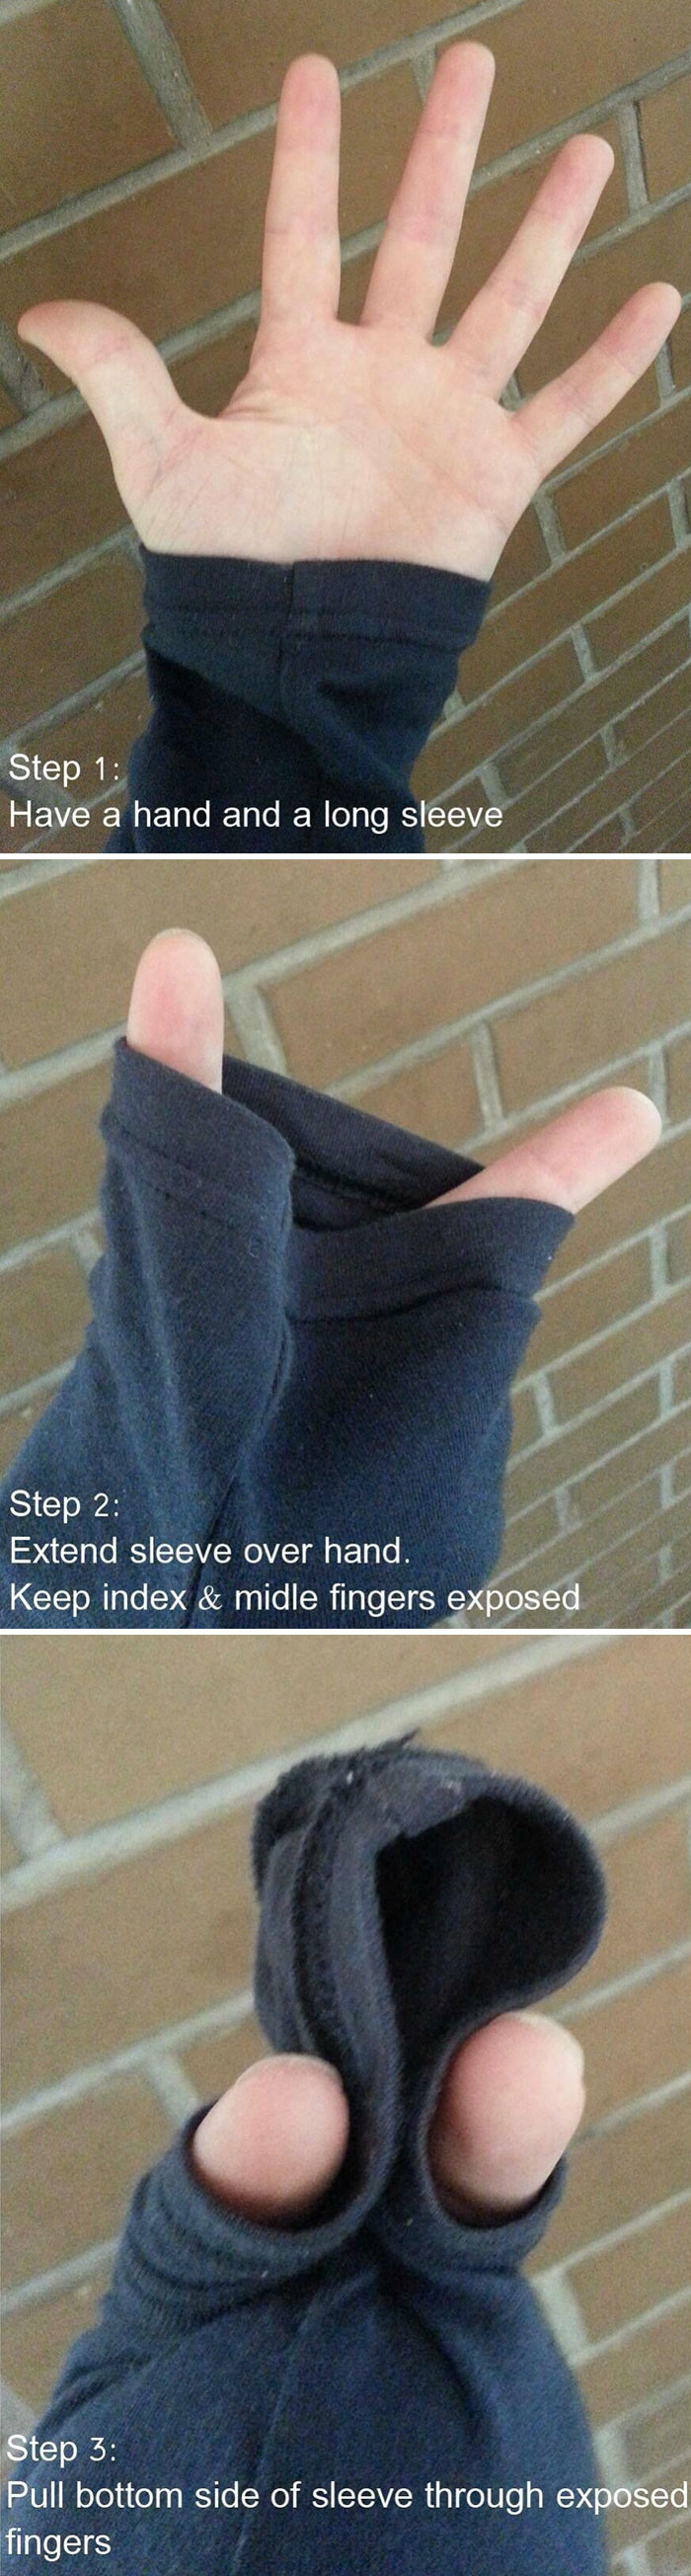 How To Make A Grim Reaper Puppet Using Your Sleeve And Hand